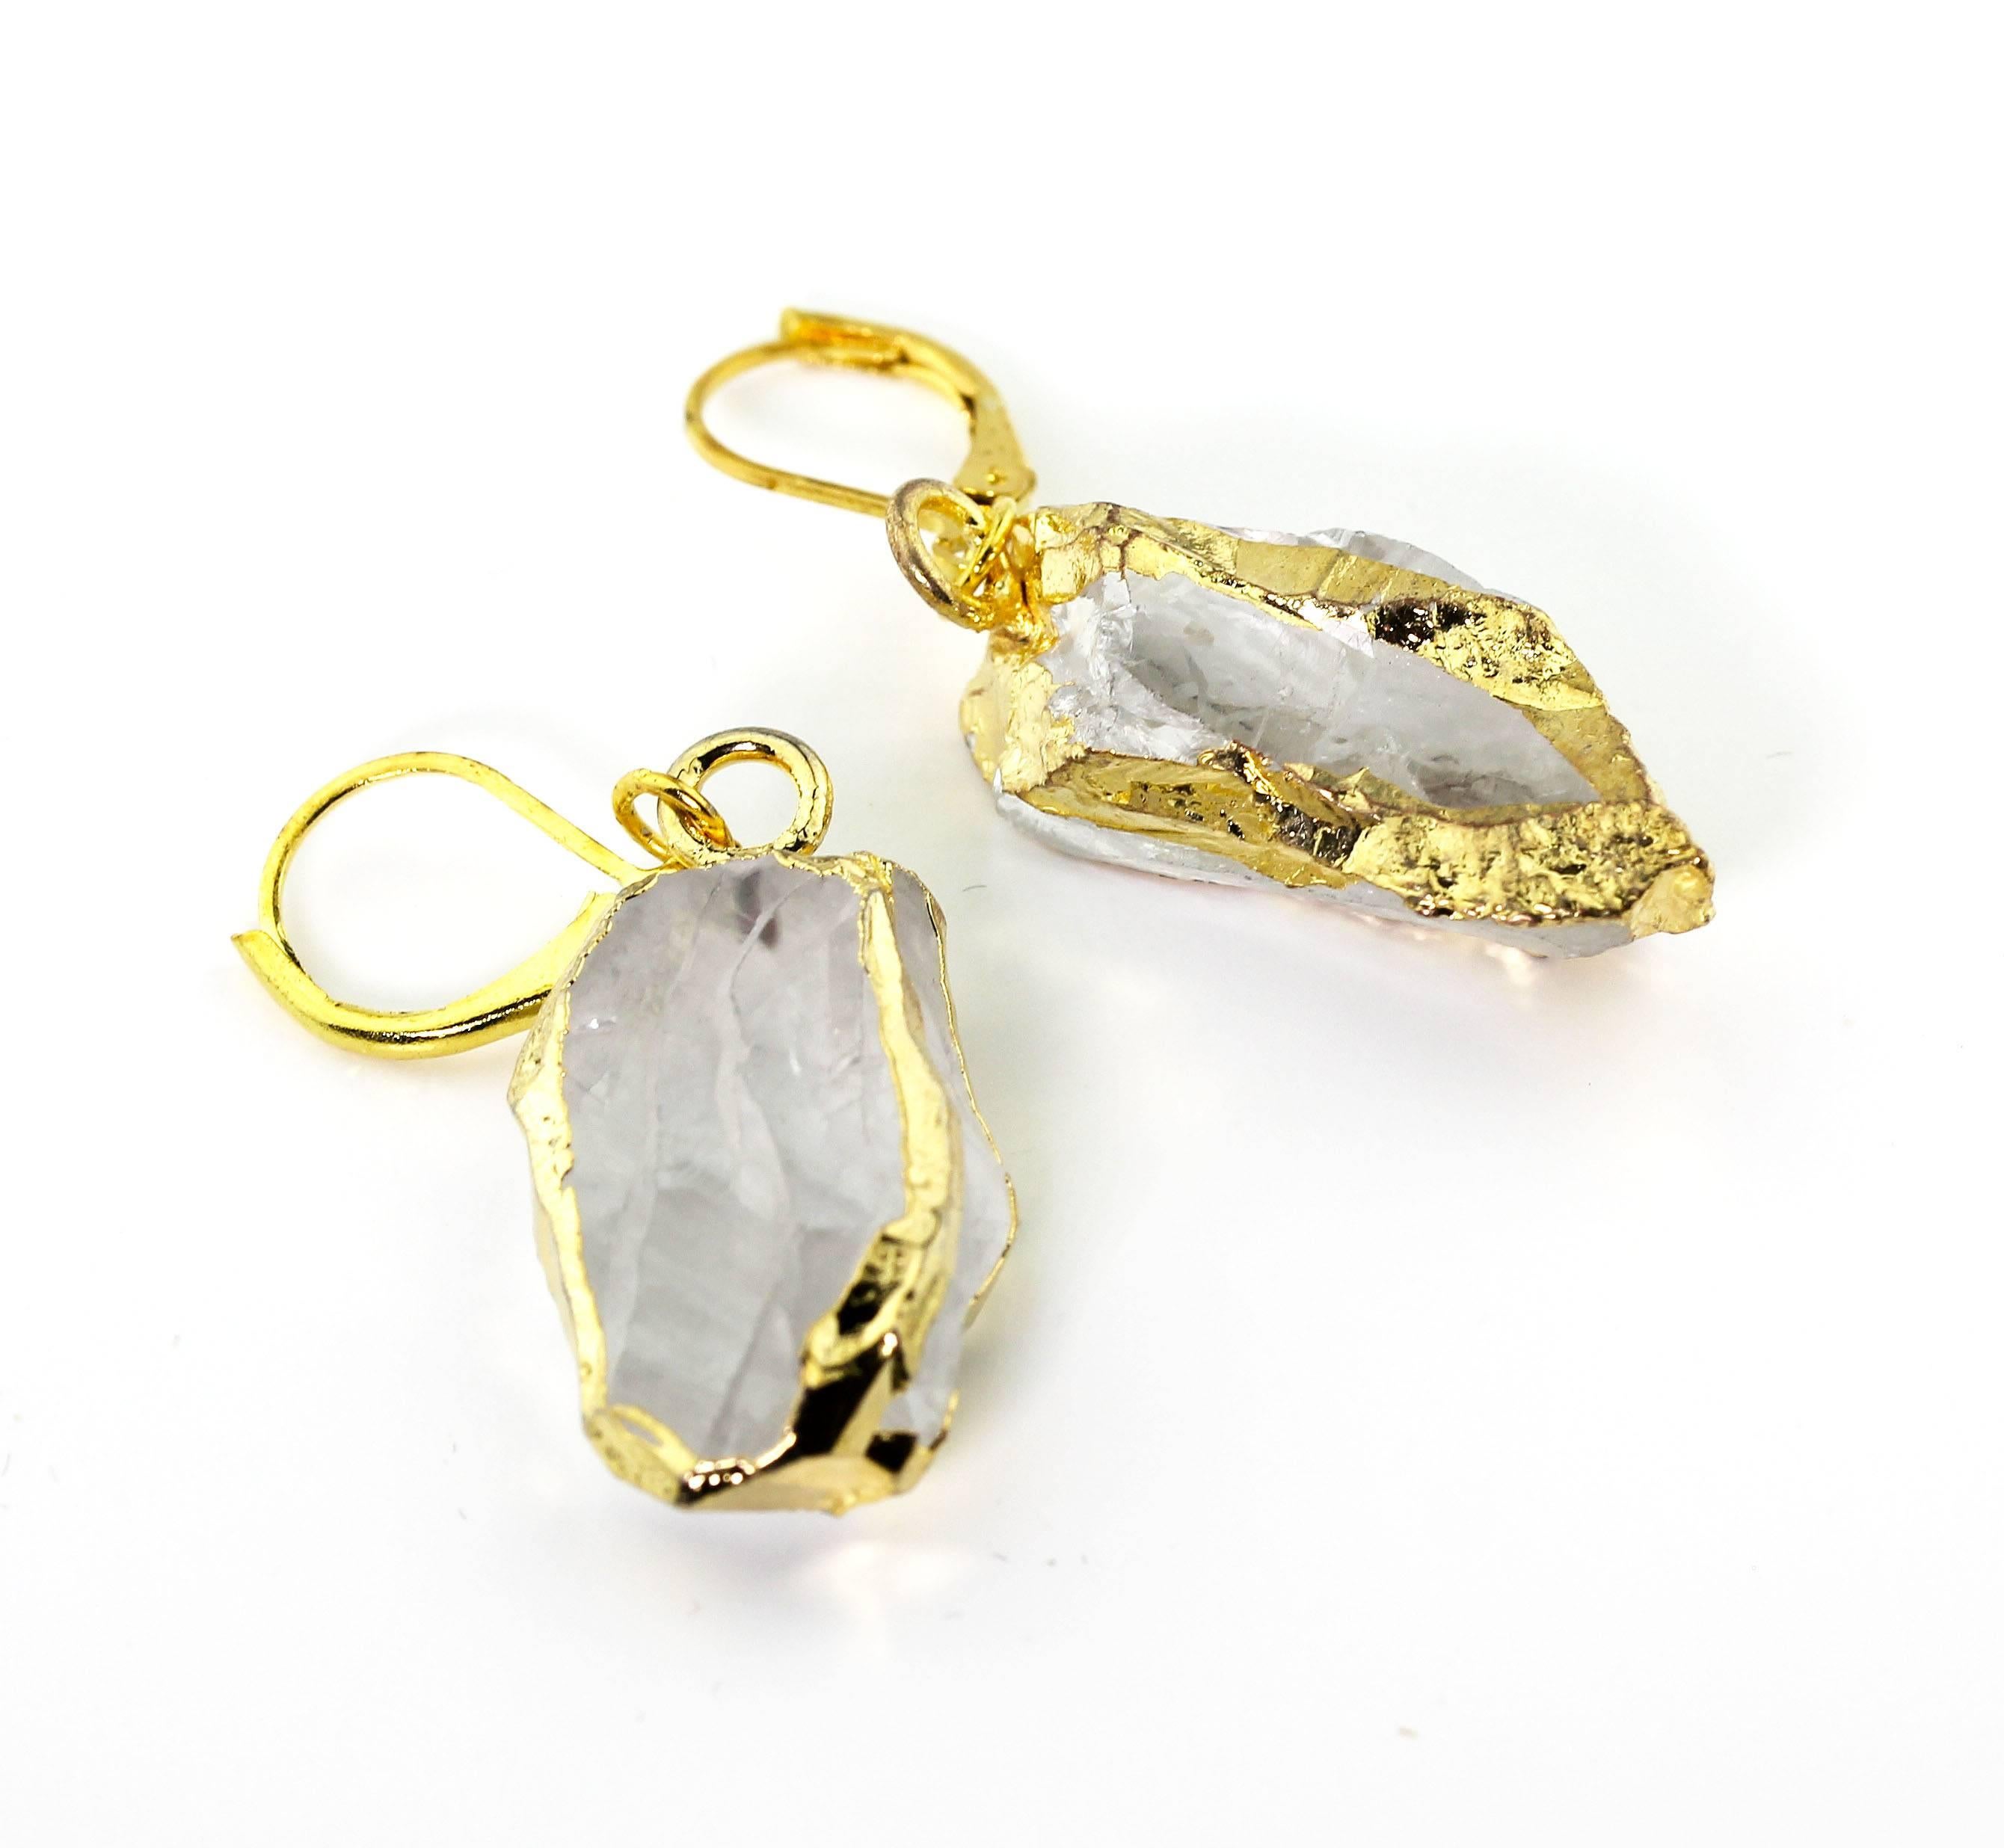 Natural Quartz rock with goldy trim dangling from Gold Plated lever-back earrings.  They hang approximately 1 3/4 inches long and go elegantly and sophisticatedly from daytime to evening.   